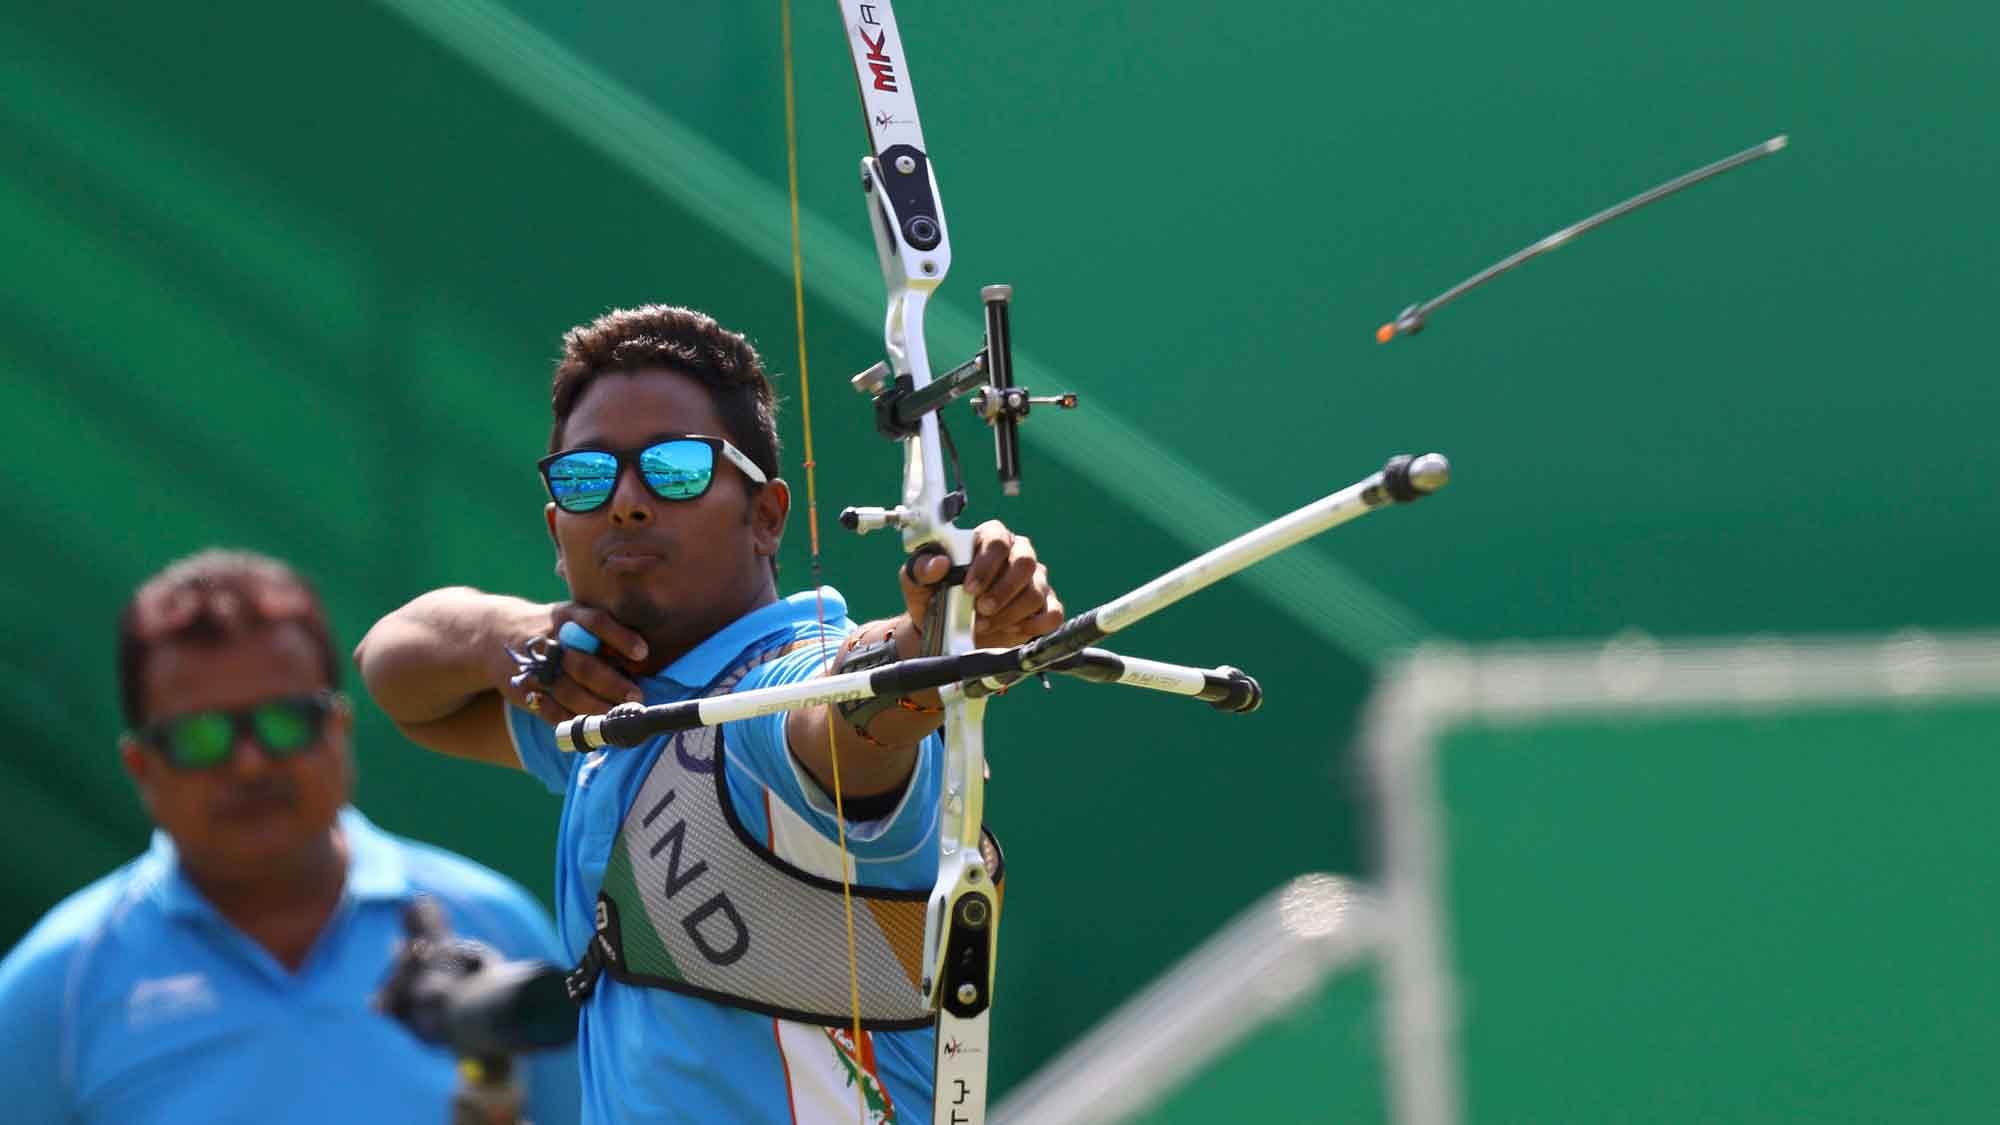 Atanu Das during his qualifying rounds on Tuesday at the Rio Olympics. (Photo: Reuters)